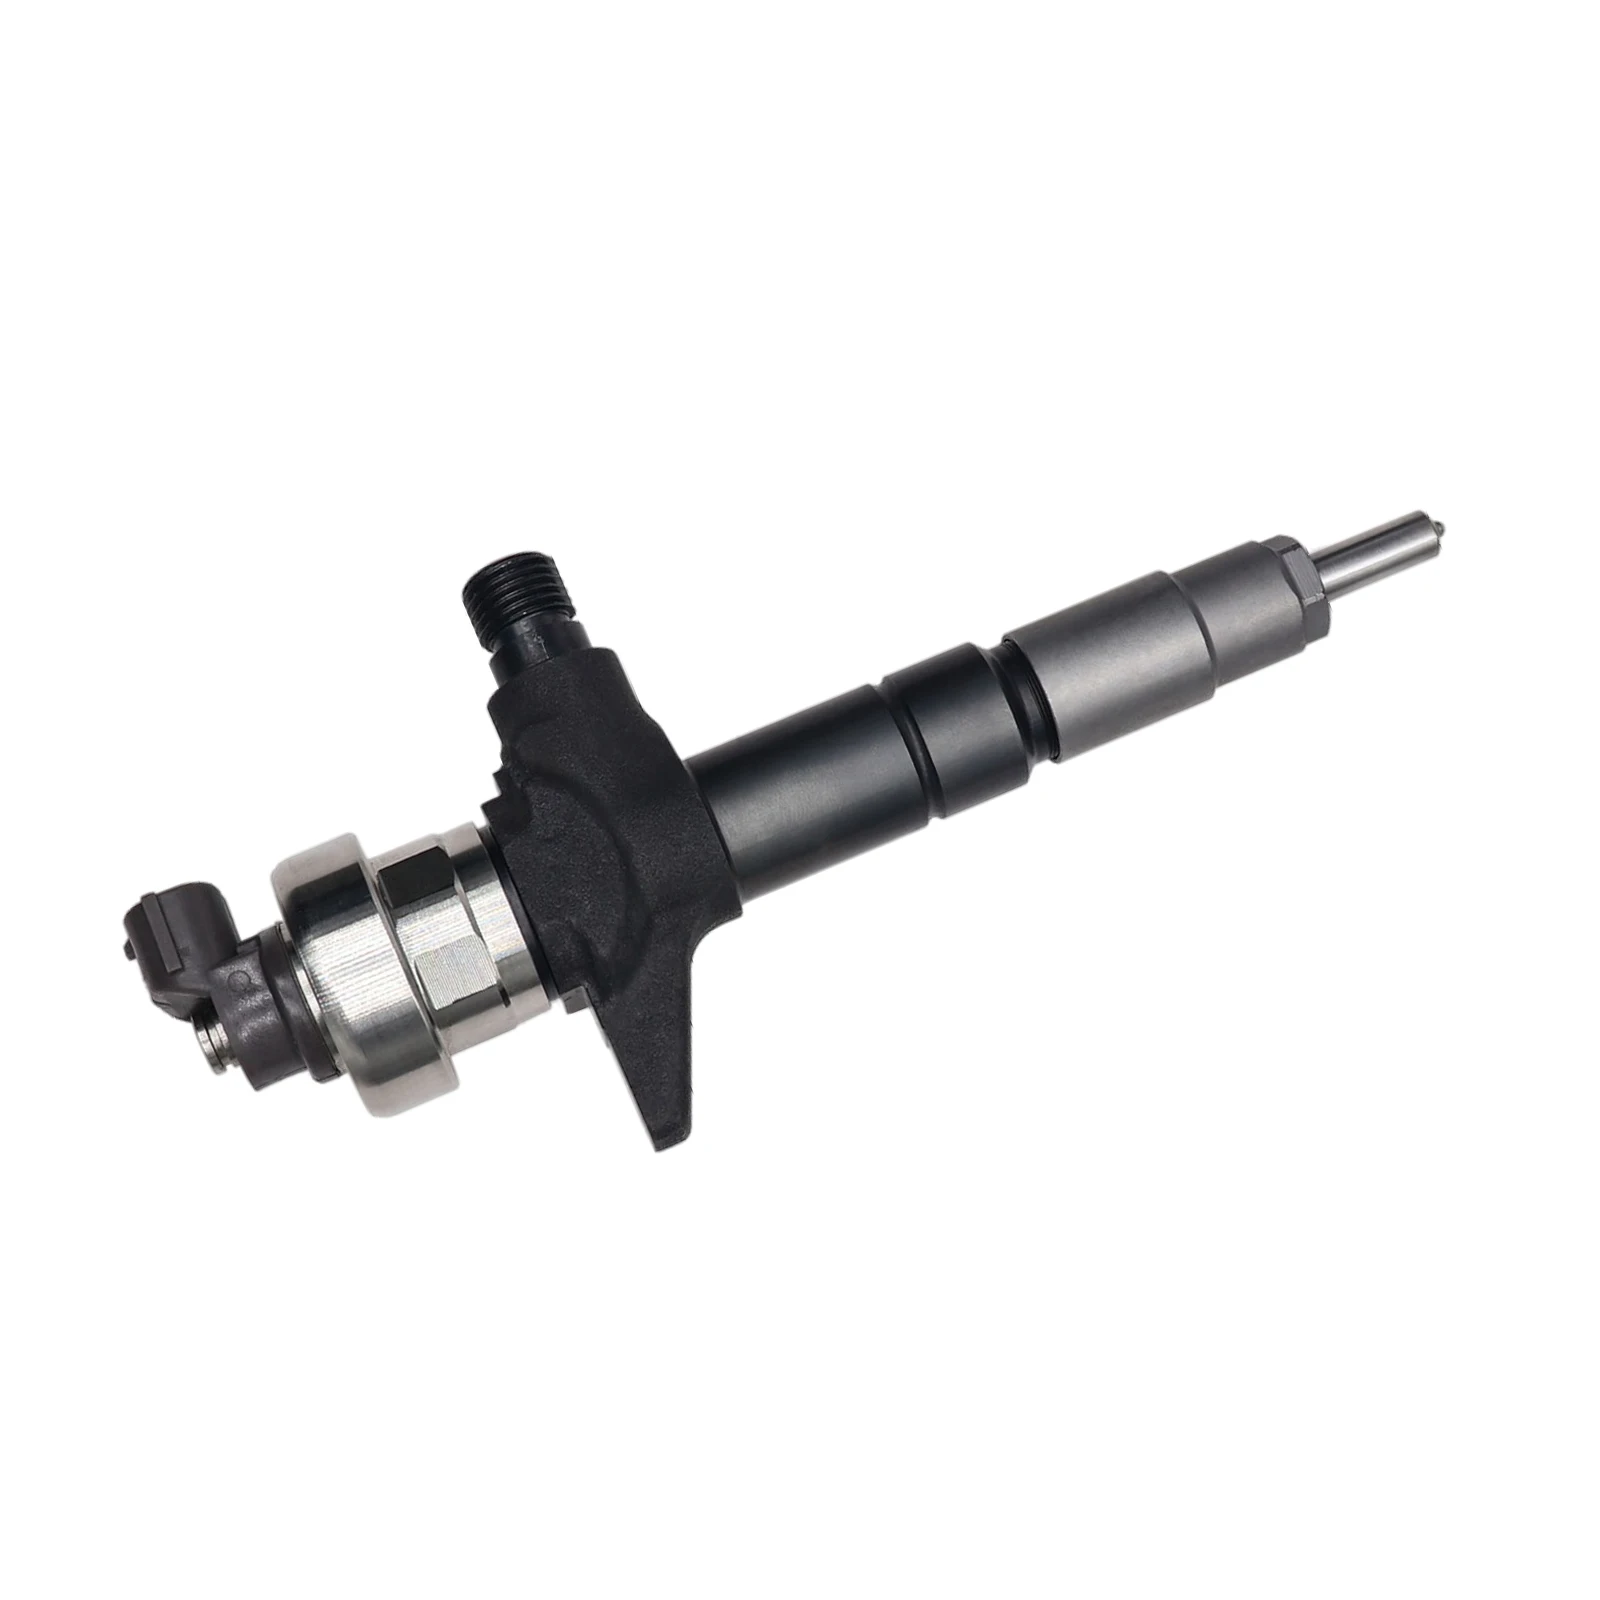 

095000-698 8980116042 8980116041 095000-6100 Fuel Injector 8-98011604-5 Nozzle Injection Fit for Isuzu Holden 3.0L 4Jj1